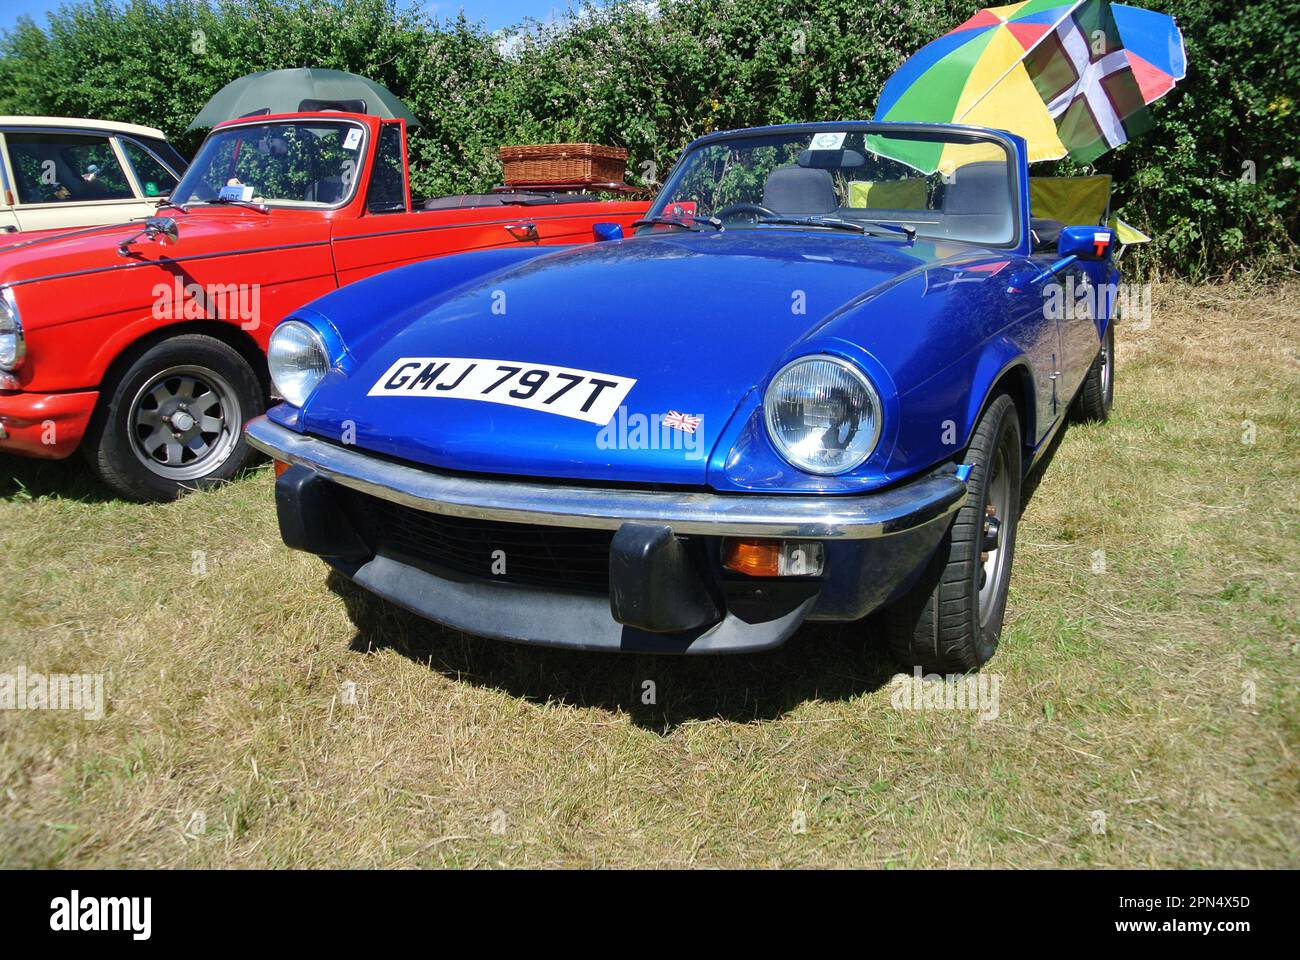 A 1979 Triumph Spitfire parked on display at the 47th Historic Vehicle Gathering, Powederham, Devon, England, UK. Stock Photo